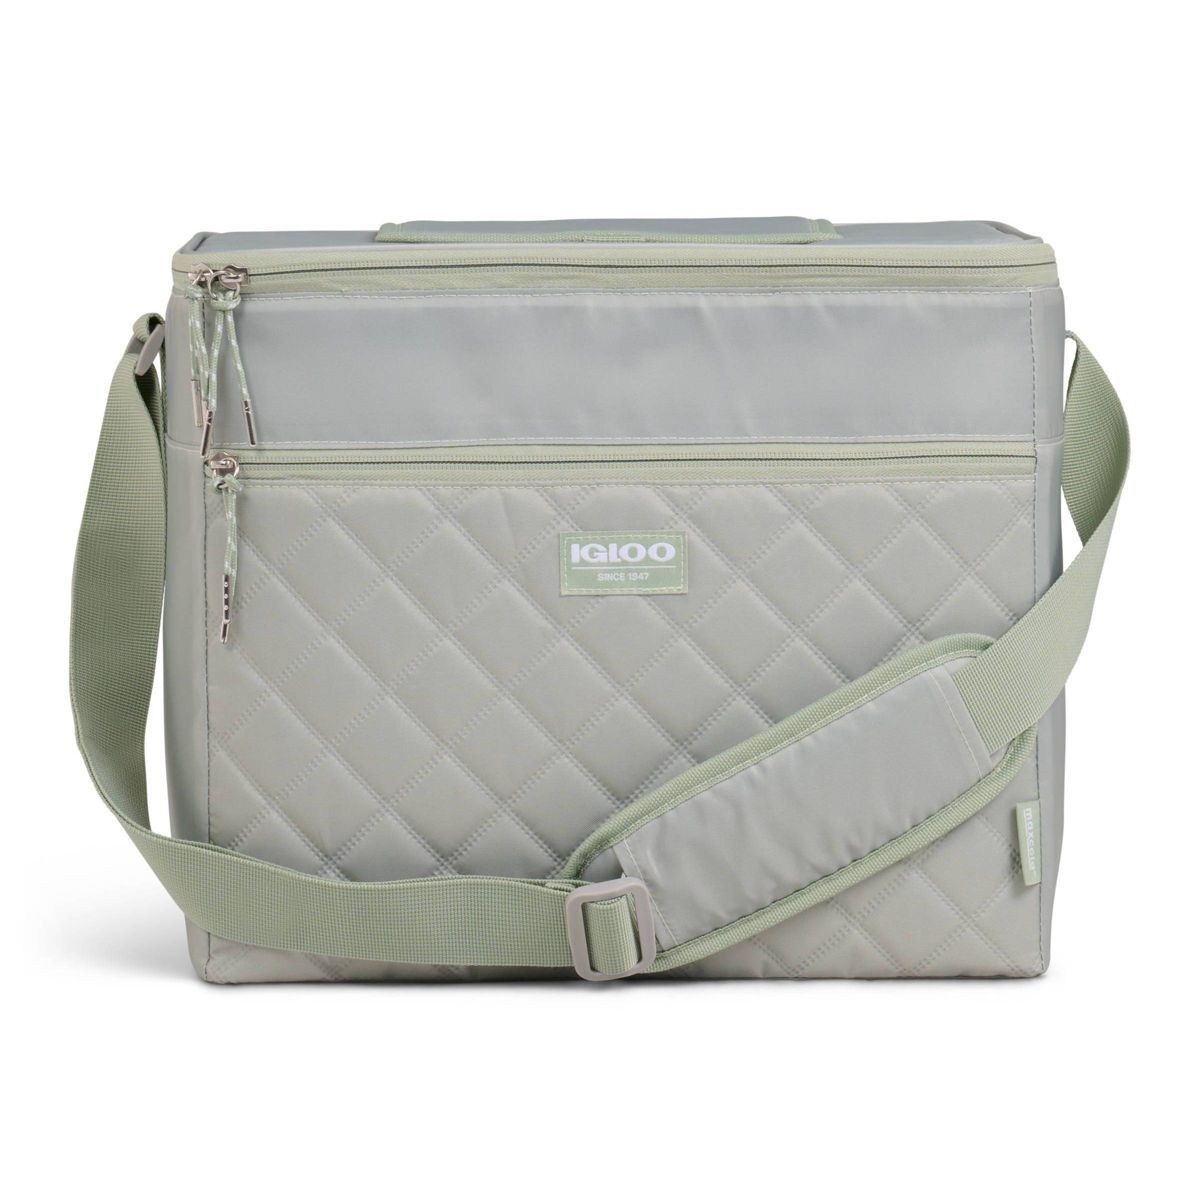 Igloo MaxCold Duo HLC 28 Soft-Sided Cooler - Sage | Target